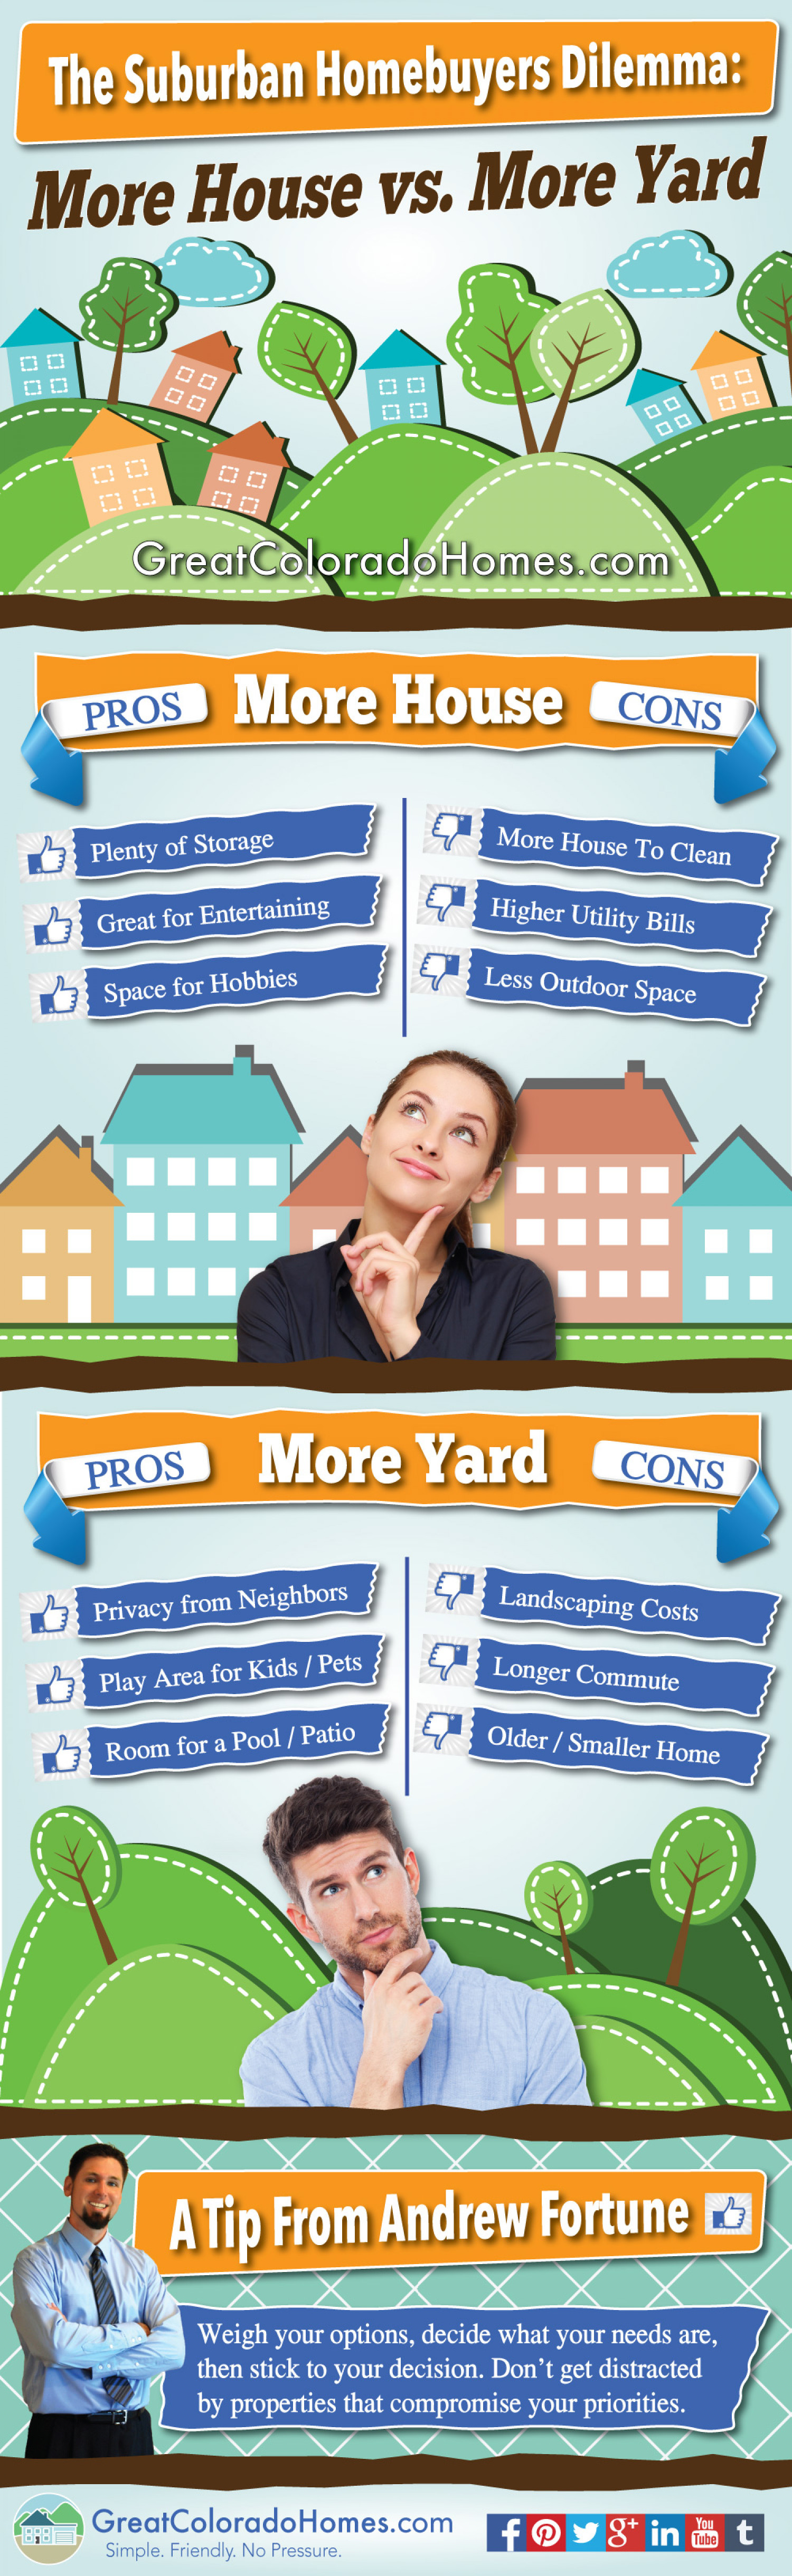 The Suburban Homebuyers Dilemma: More House Versus More Yard Infographic